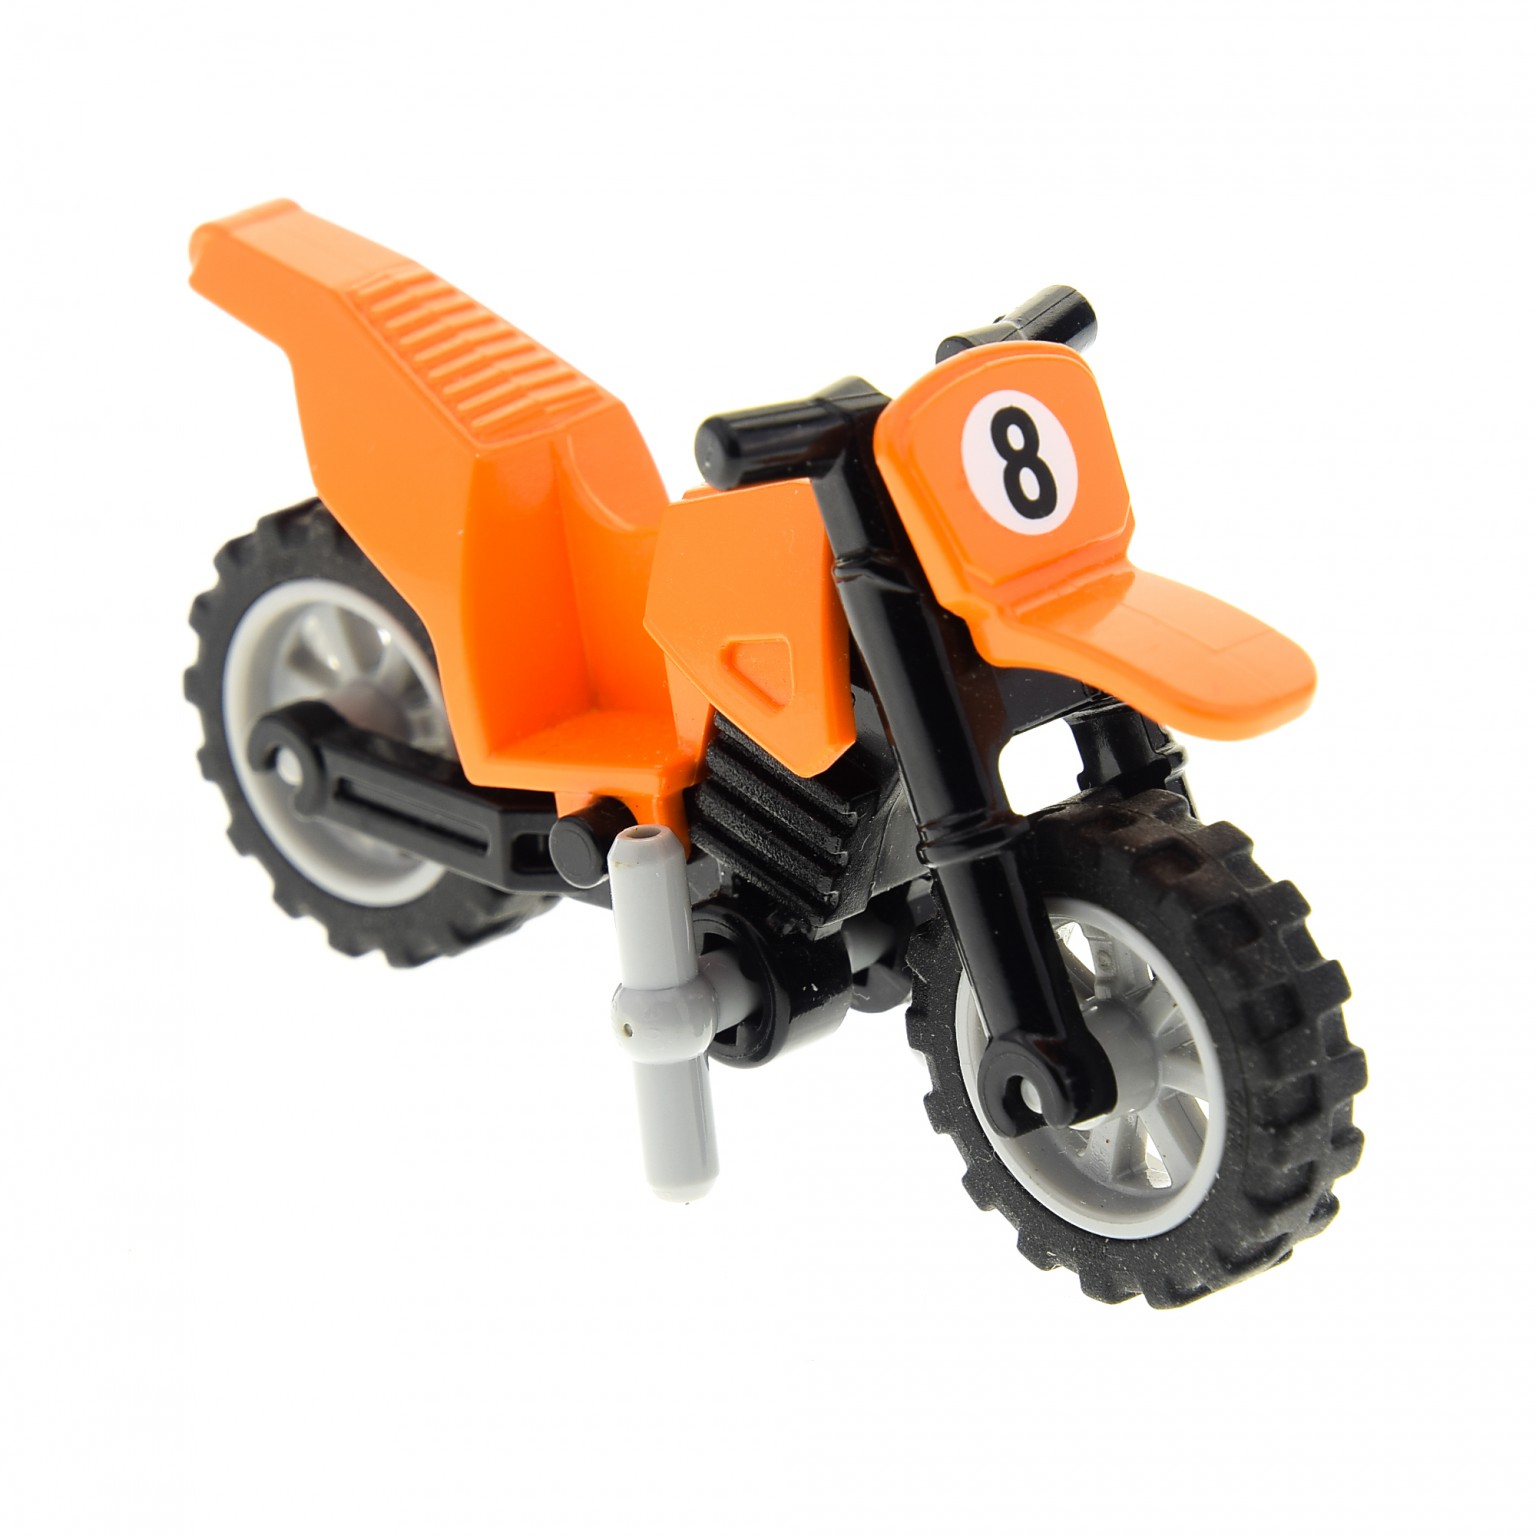 1 x Lego brick orange Motorcycle Dirt Bike, Complete Assembly with Black  Chassis, LBG Wheels and Fairing with '8' Pattern (Sticker) - Set 4433